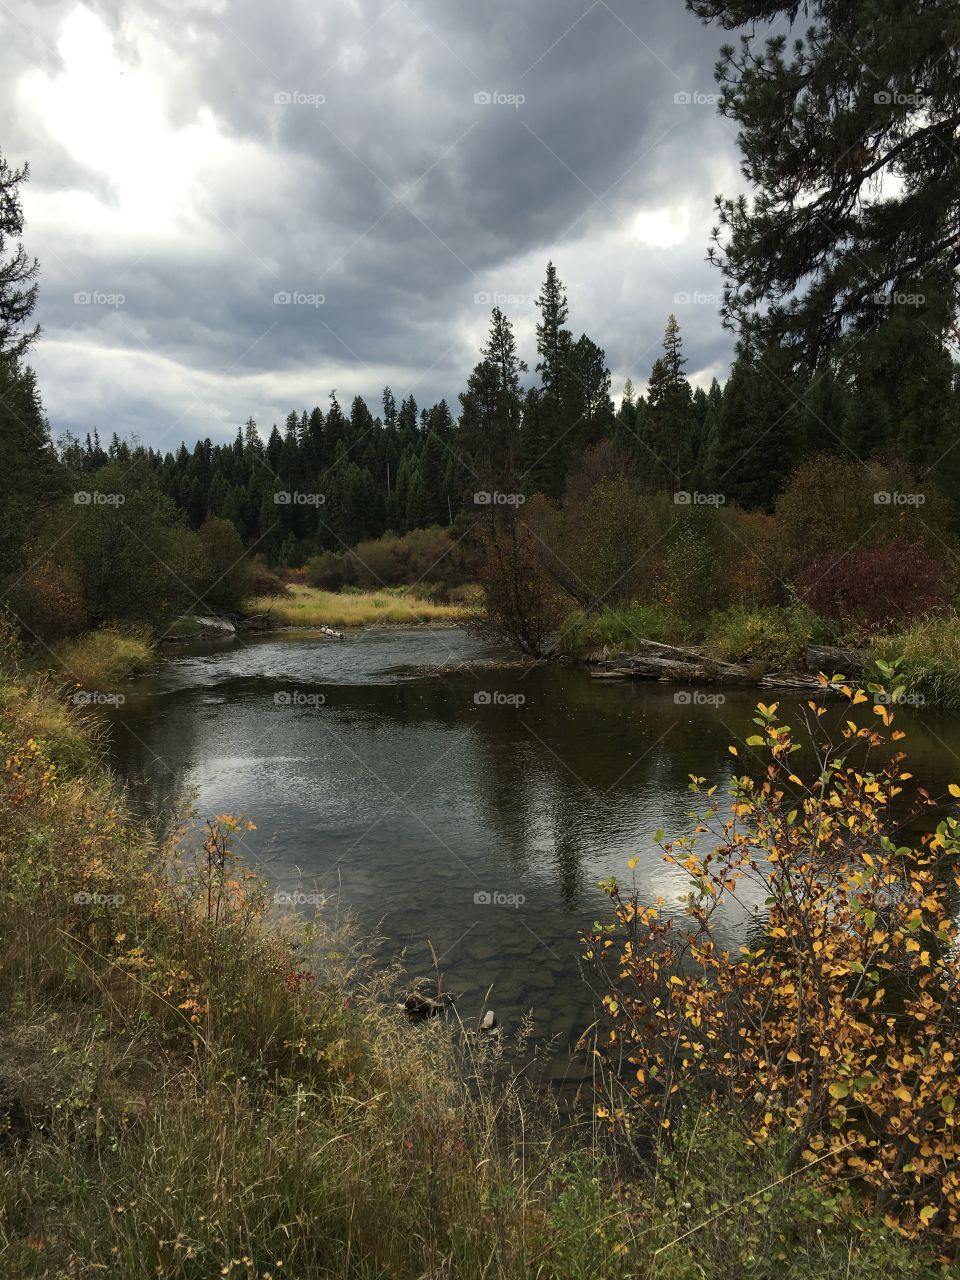 Autumn on the river in Montana. 